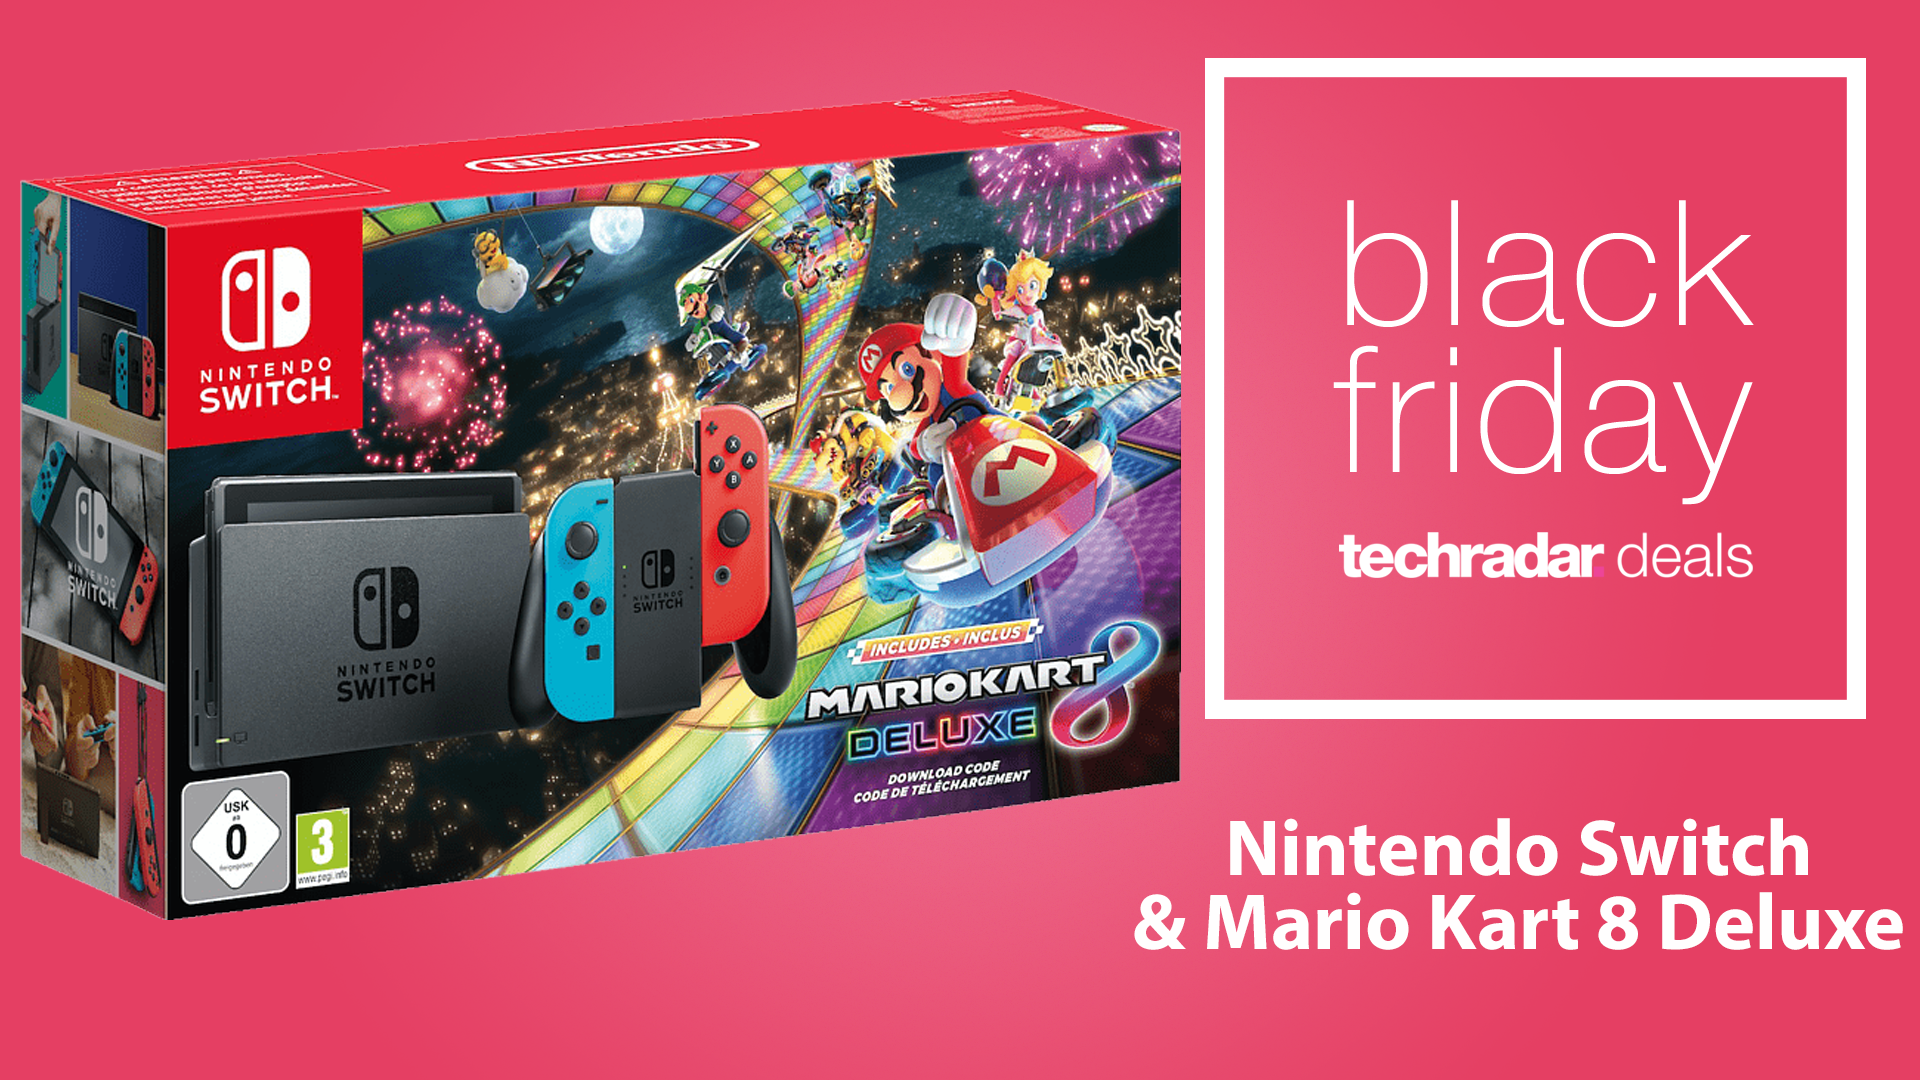 Nintendo Switch and Mario Kart 8 Deluxe bundle for Black Friday